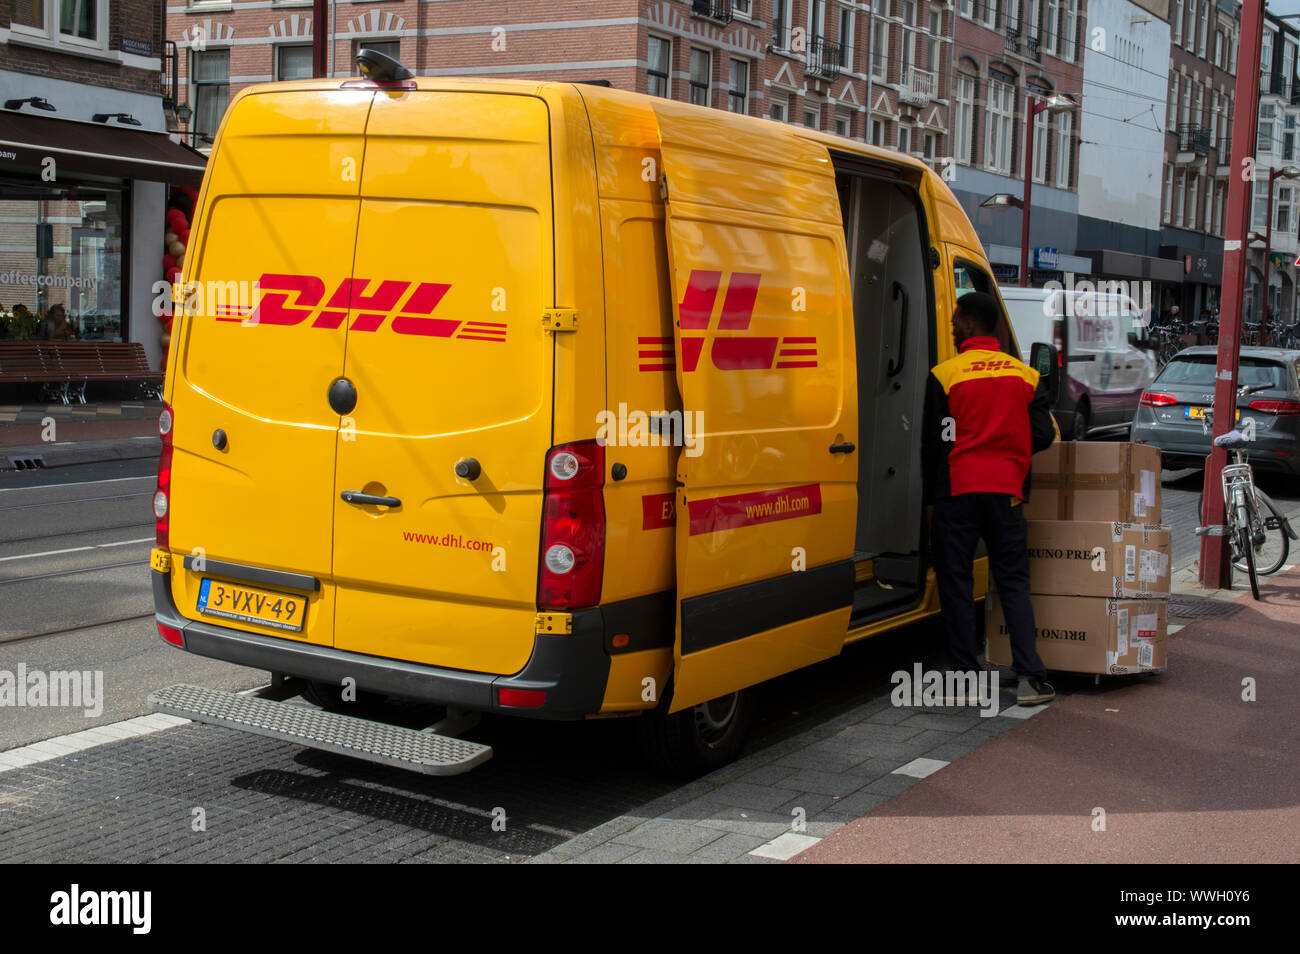 Dhl Delivery Man Stock Photos & Dhl Delivery Man Stock Images - Alamy